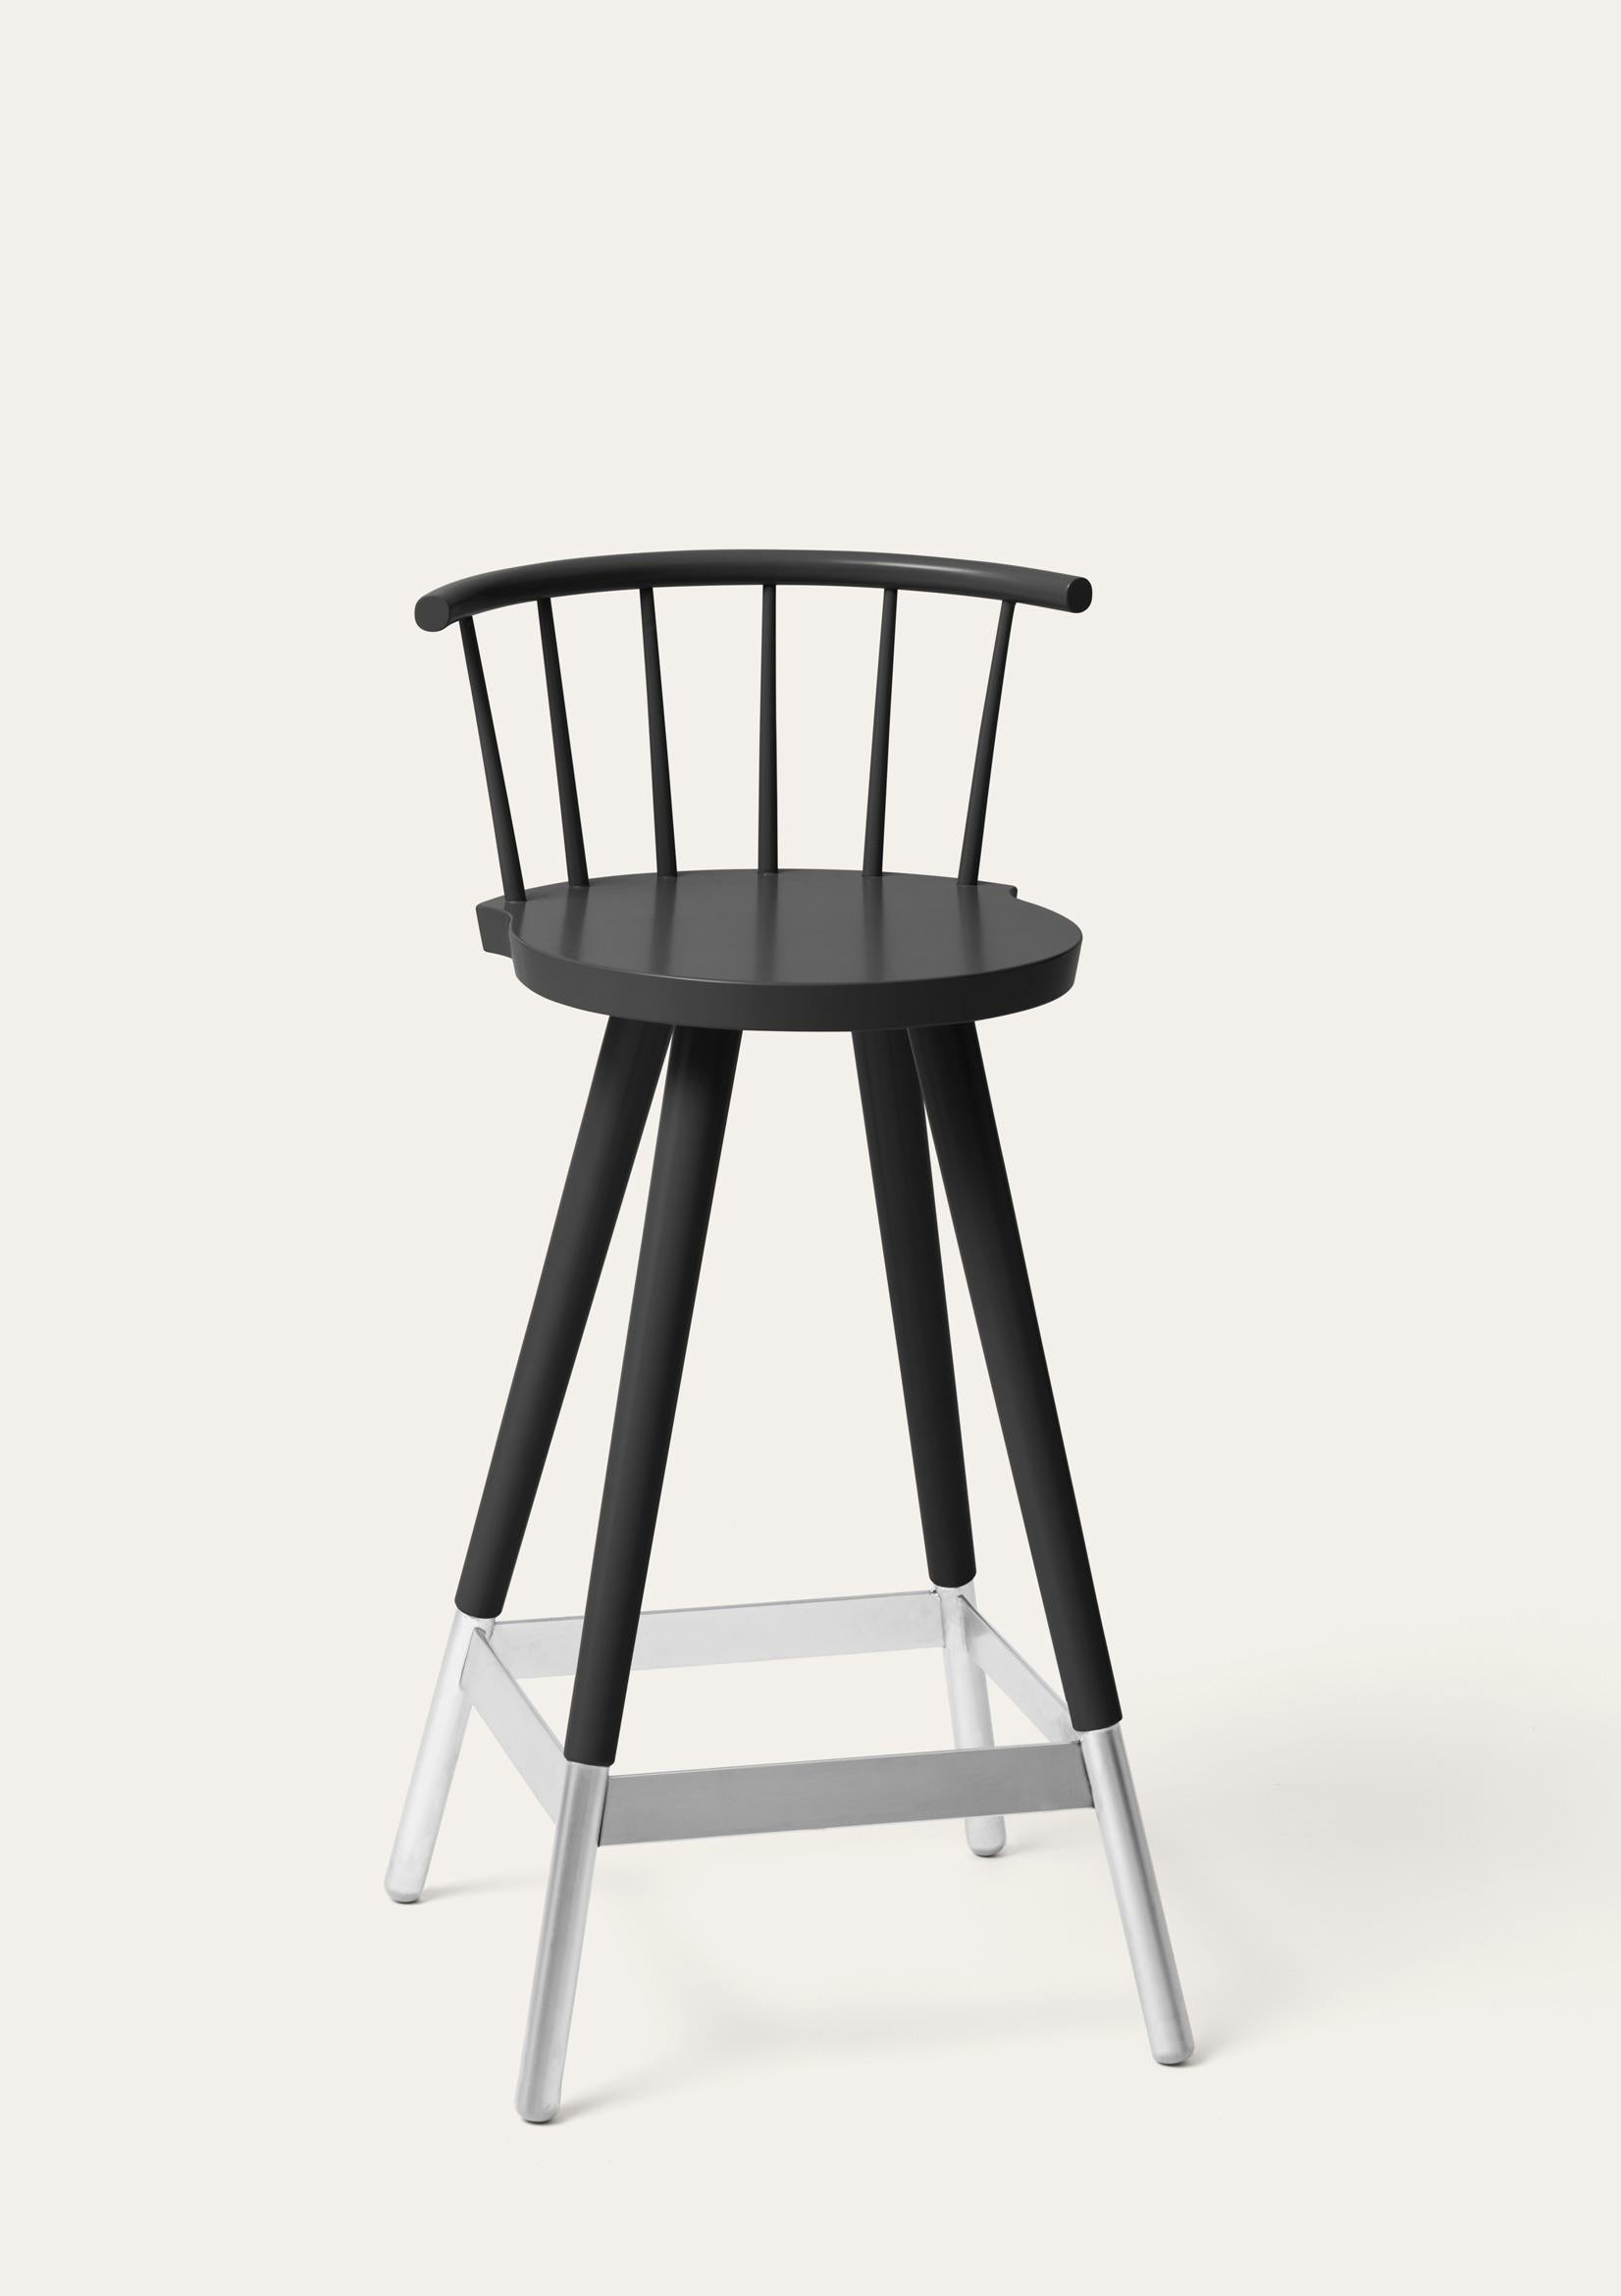 Black Tupp barstool by Storängen Design
Dimensions: D 41 x W 41 x H 85 x SH 65 cm
Materials: birch wood, nickel plated steel.
Also available in other colors.

Give the bar some character! Tupp is avaliable in two heights, both with and without